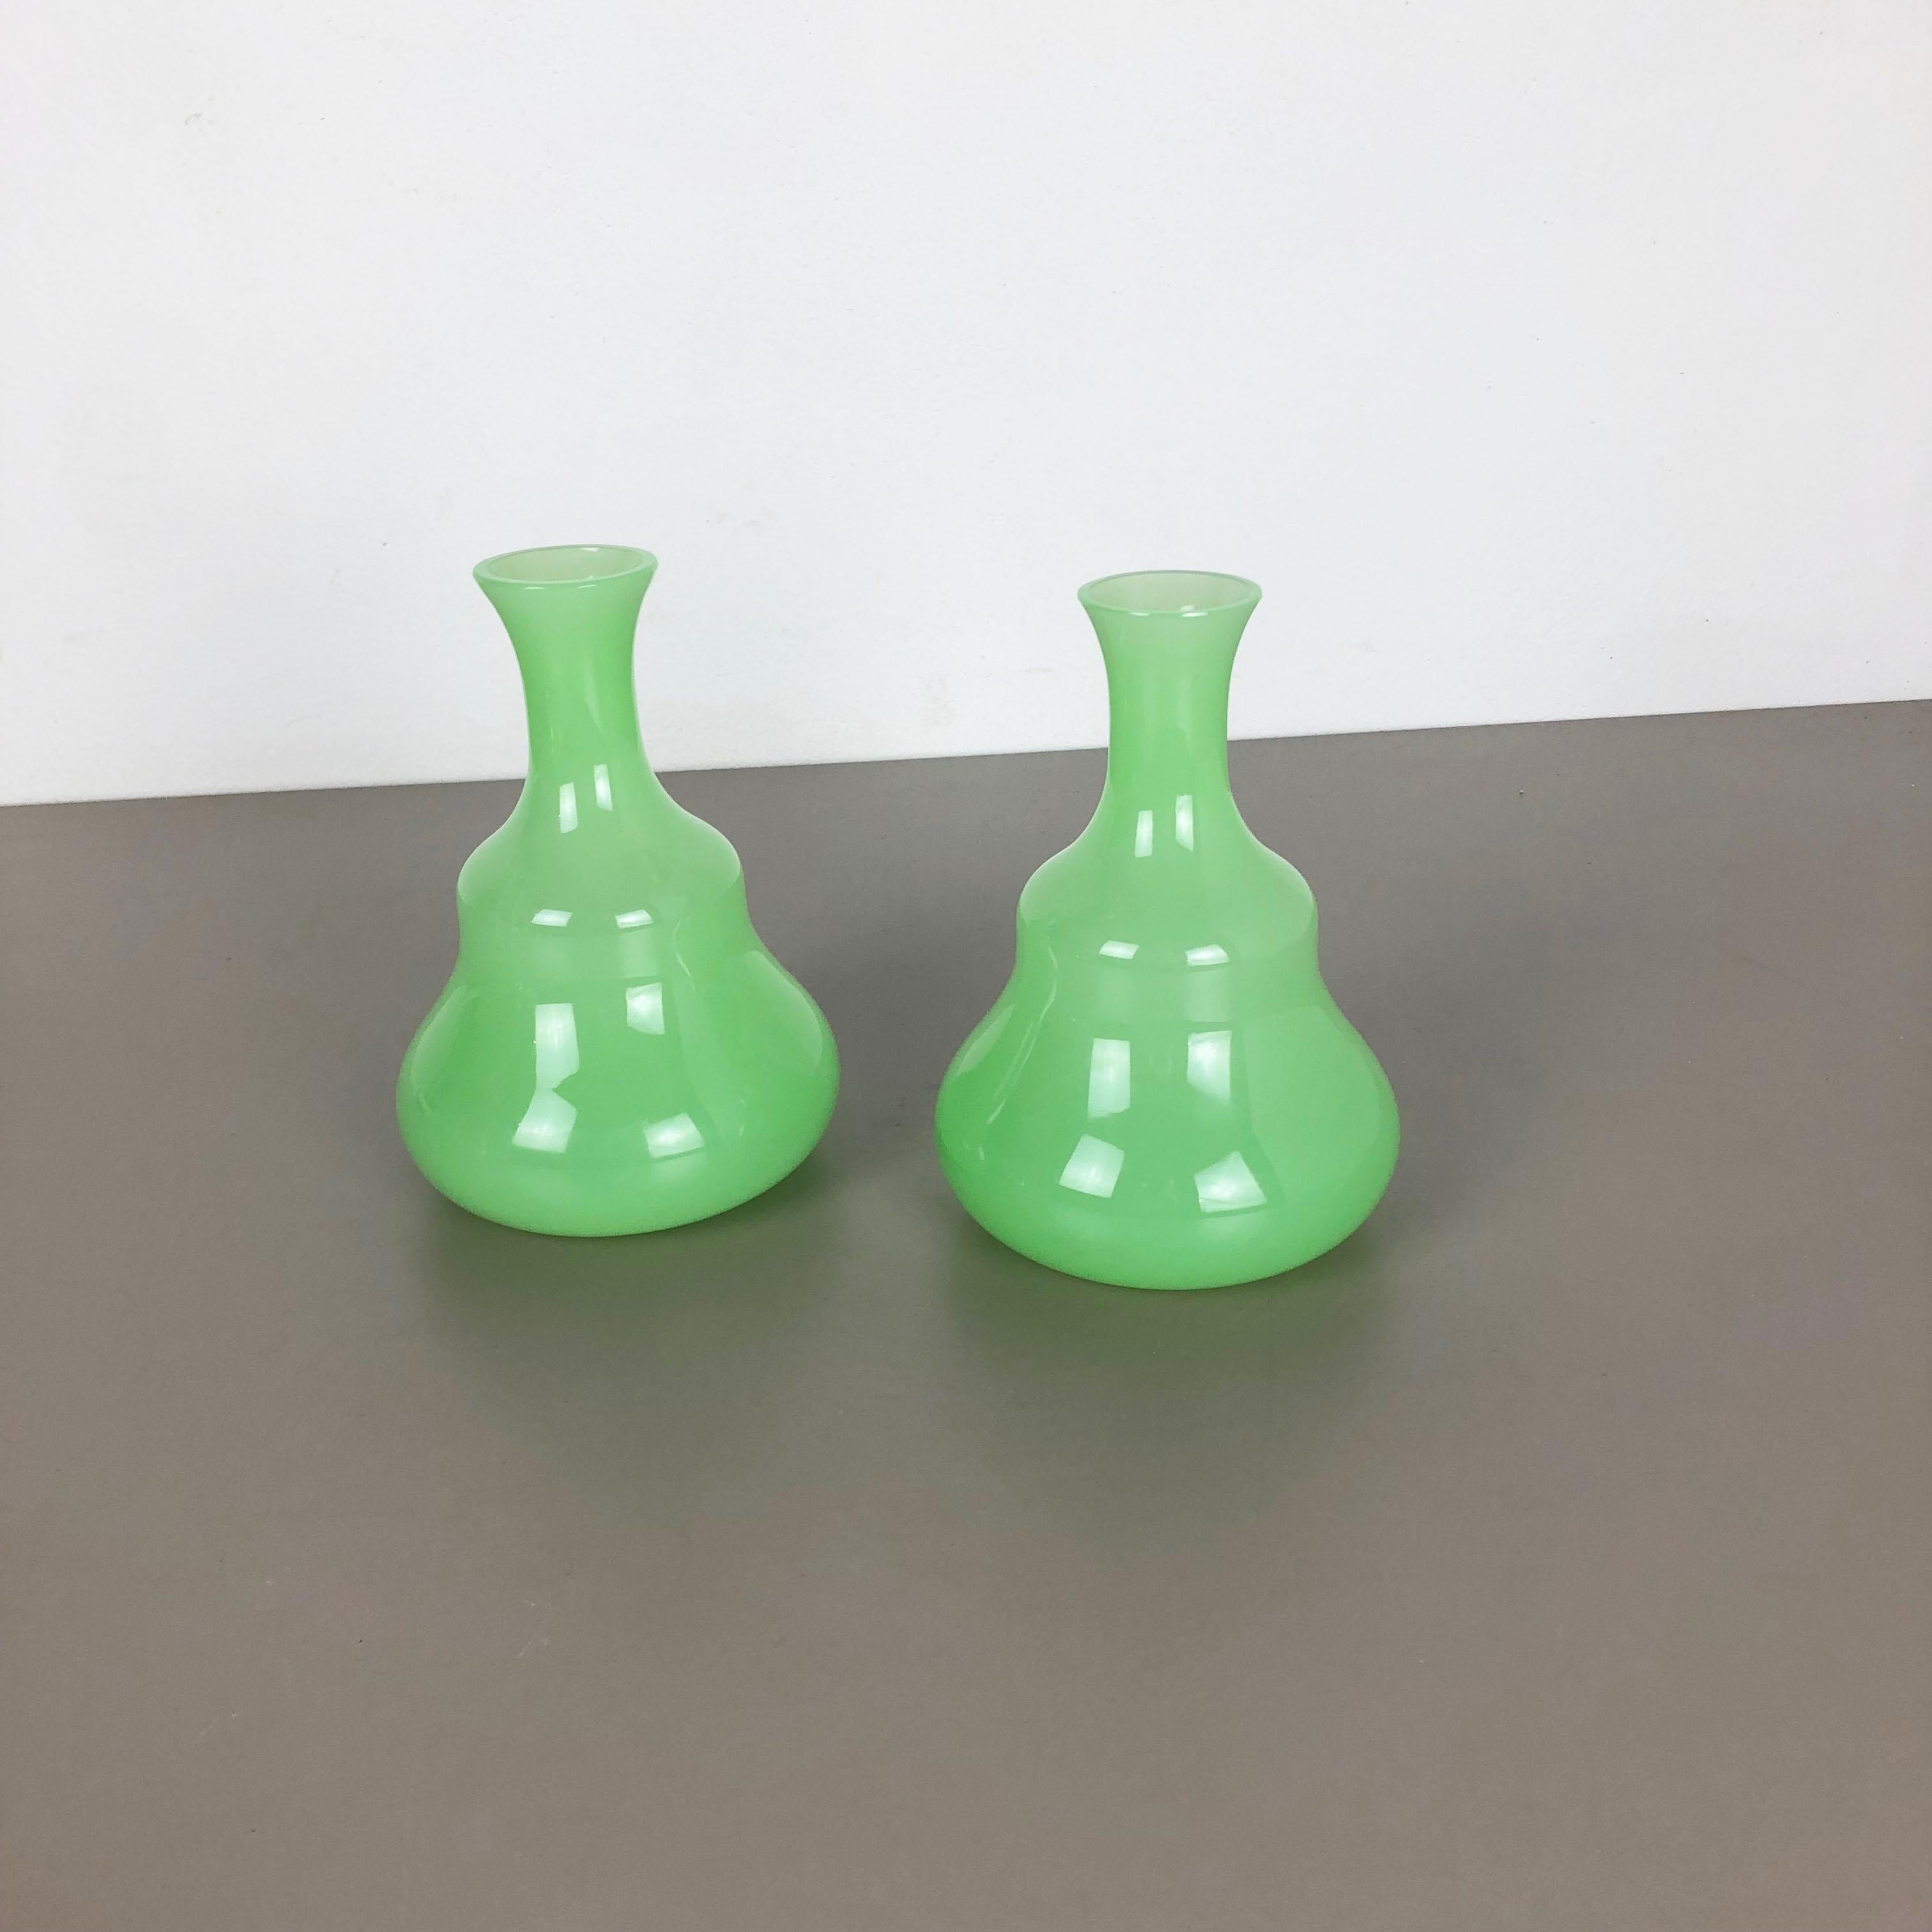 Italian Set of 2 New Old Stock Green Murano Opaline Glass Vases by Gino Cenedese, 1960s